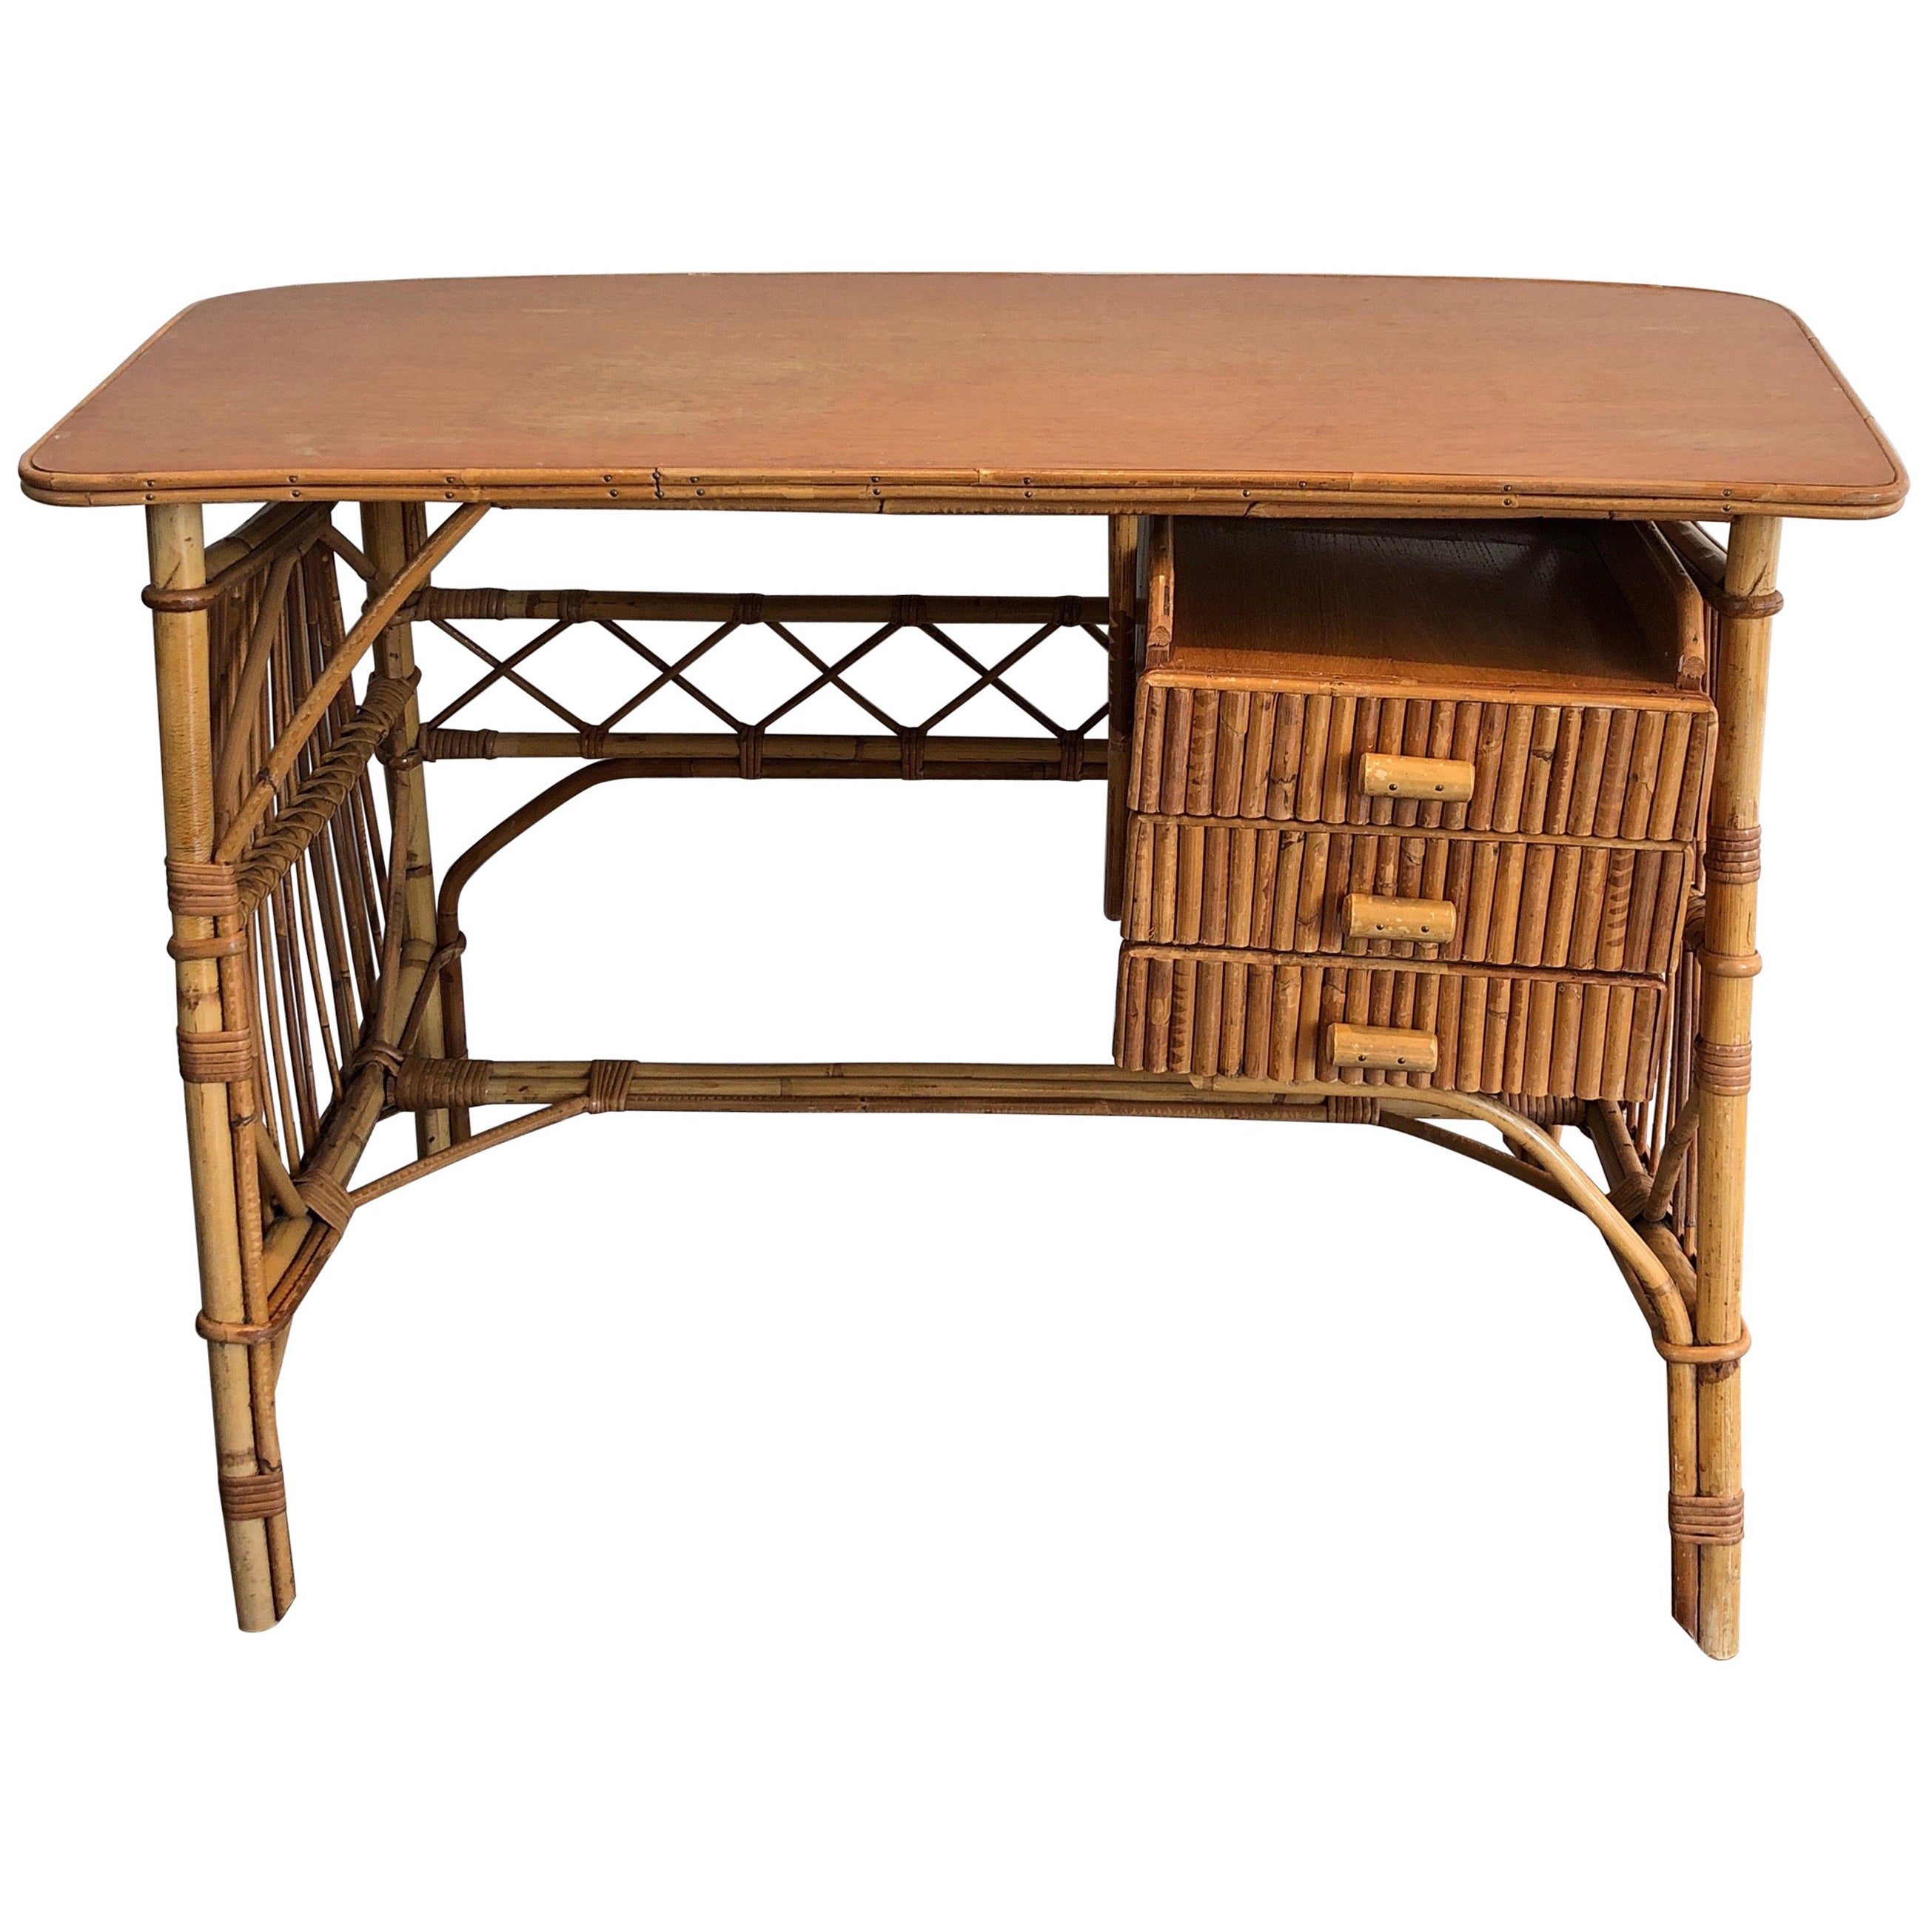 Attributed to Audoux Minet, Rattan Desk with Drawers, French, Circa 1970 For Sale